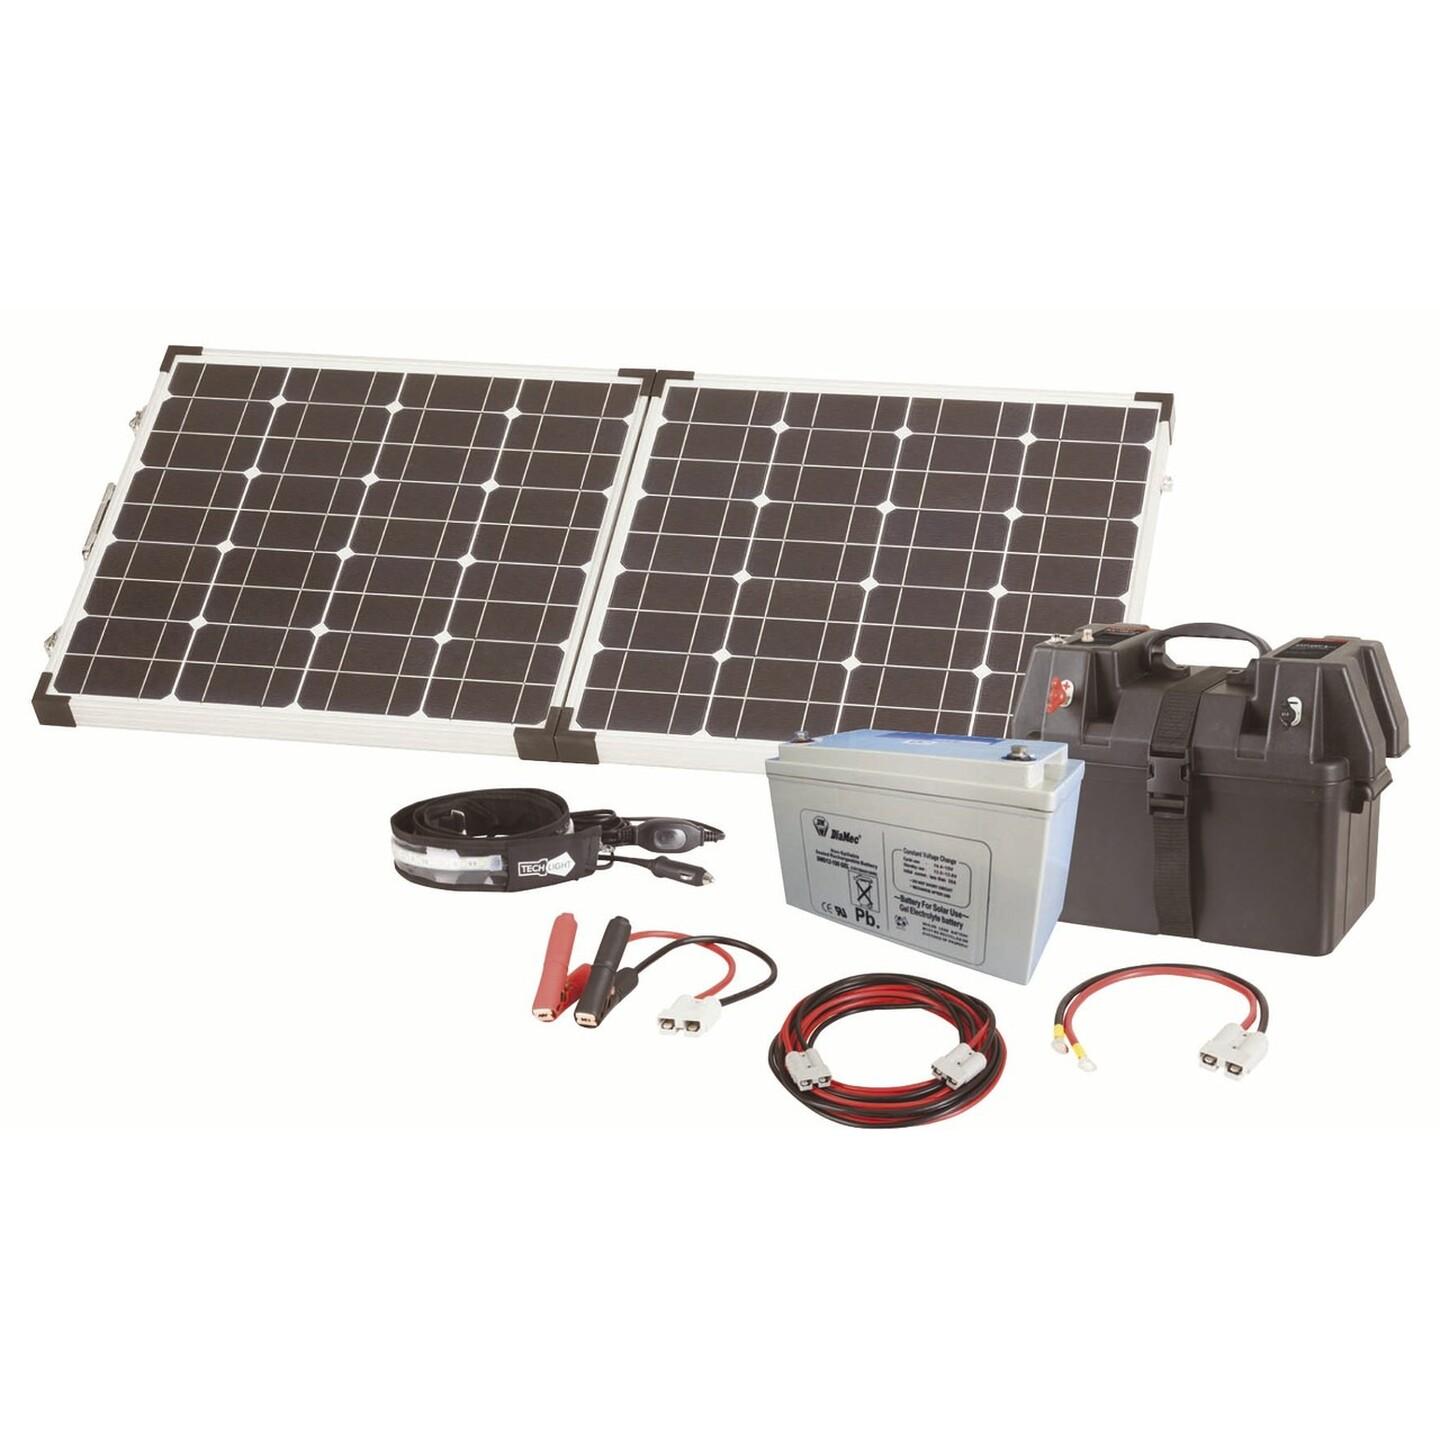 80W Outdoor Fold-up Solar Power Pack